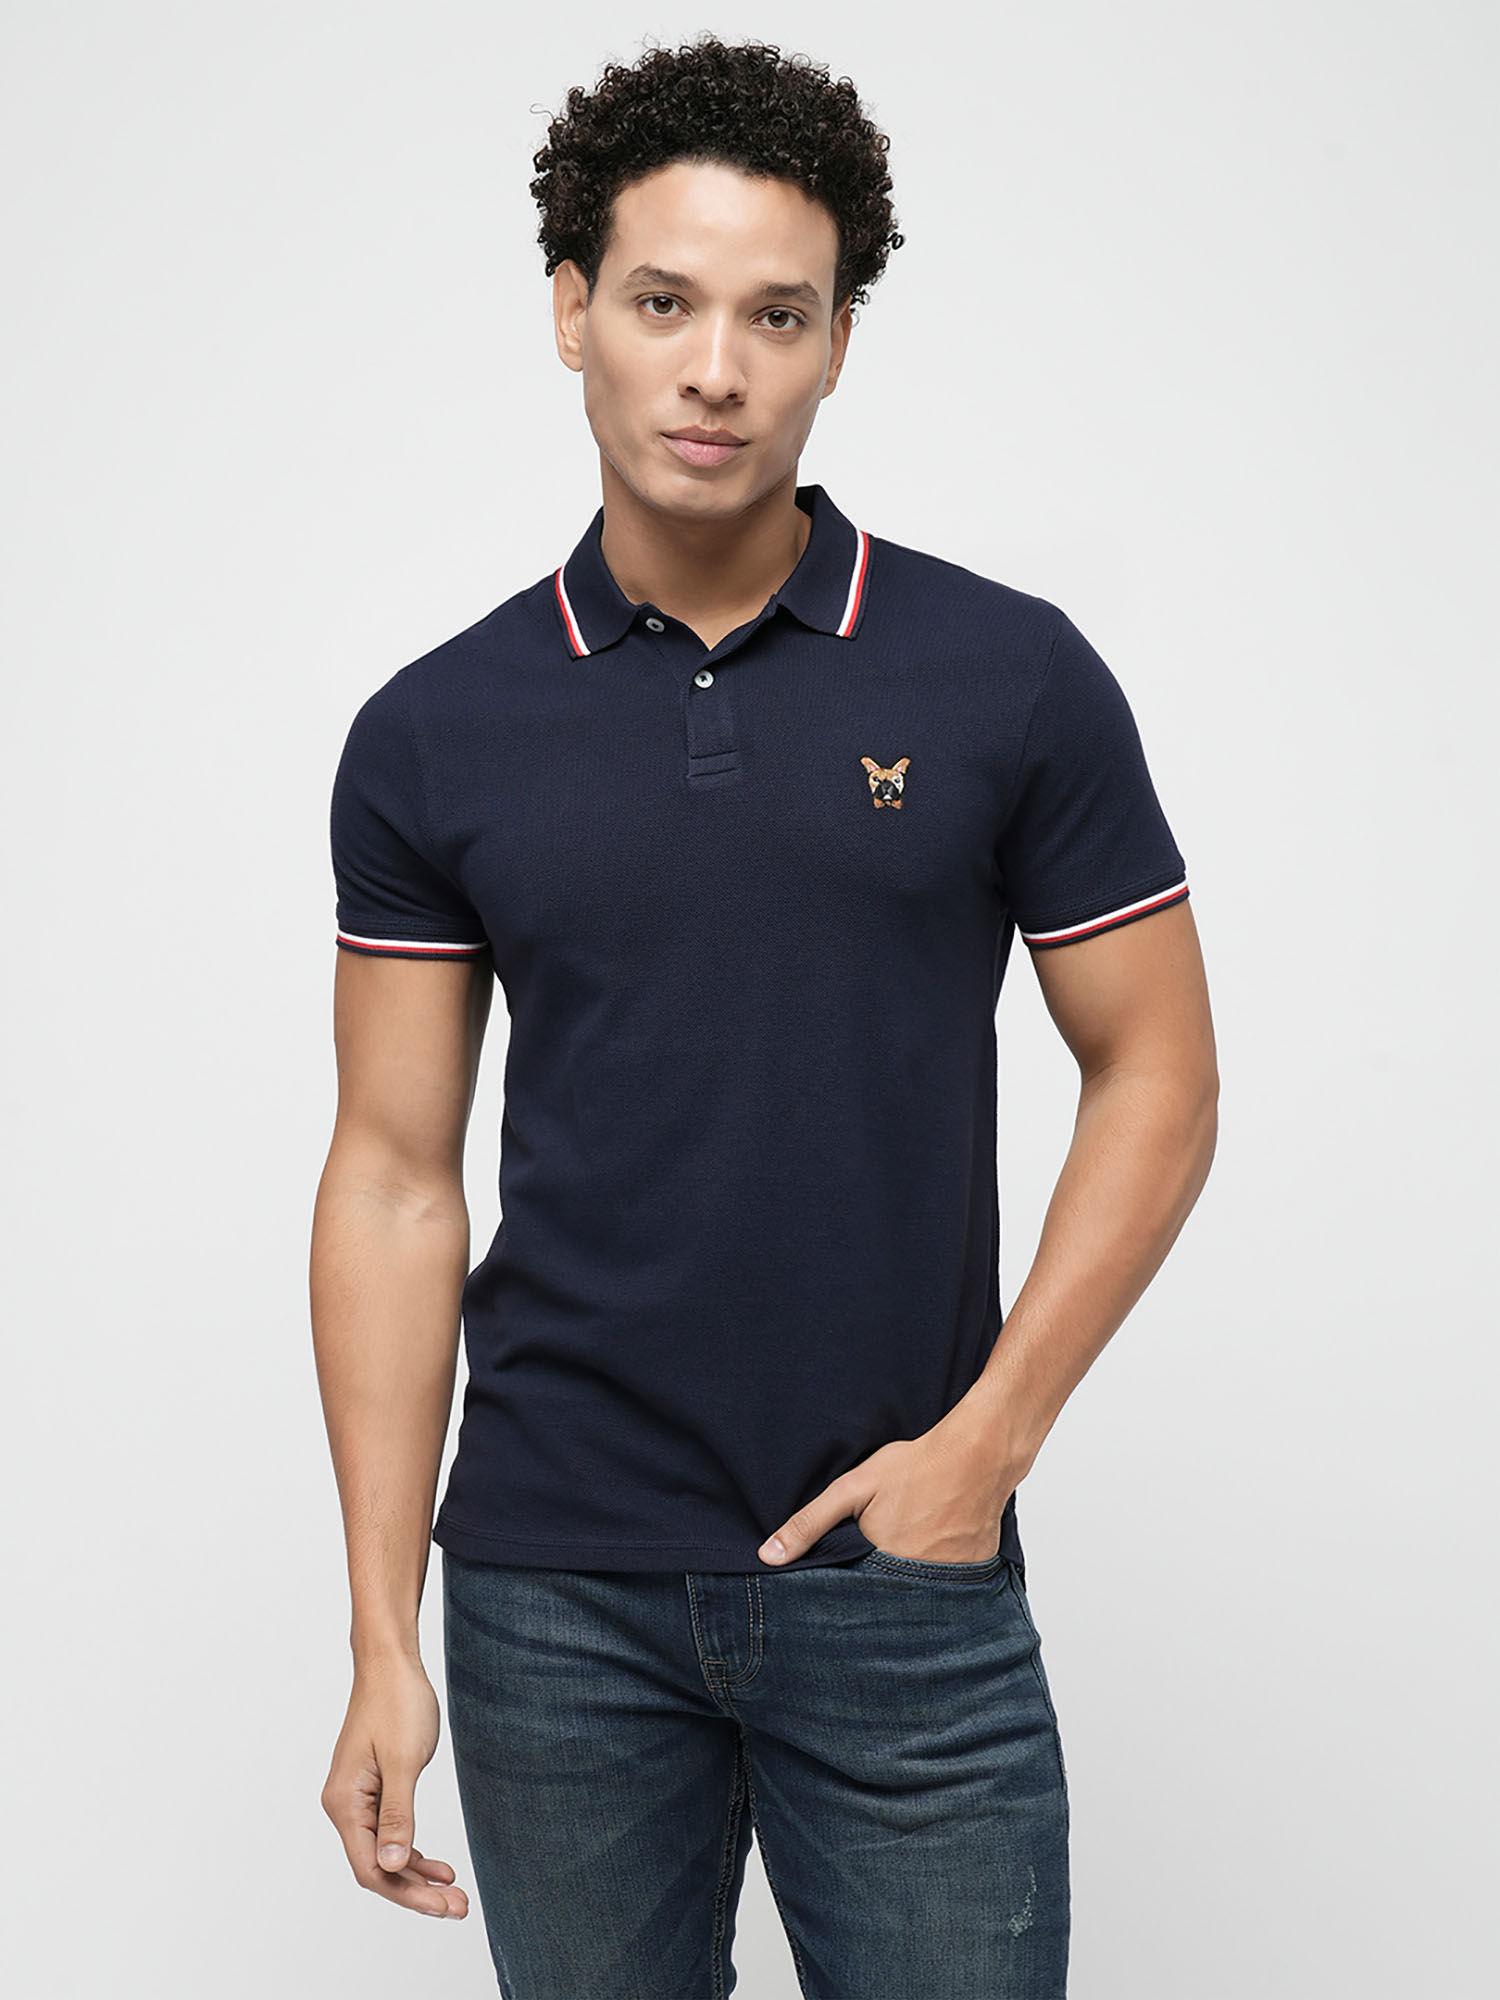 solid-navy-blue-slim-fit-polo-t-shirt